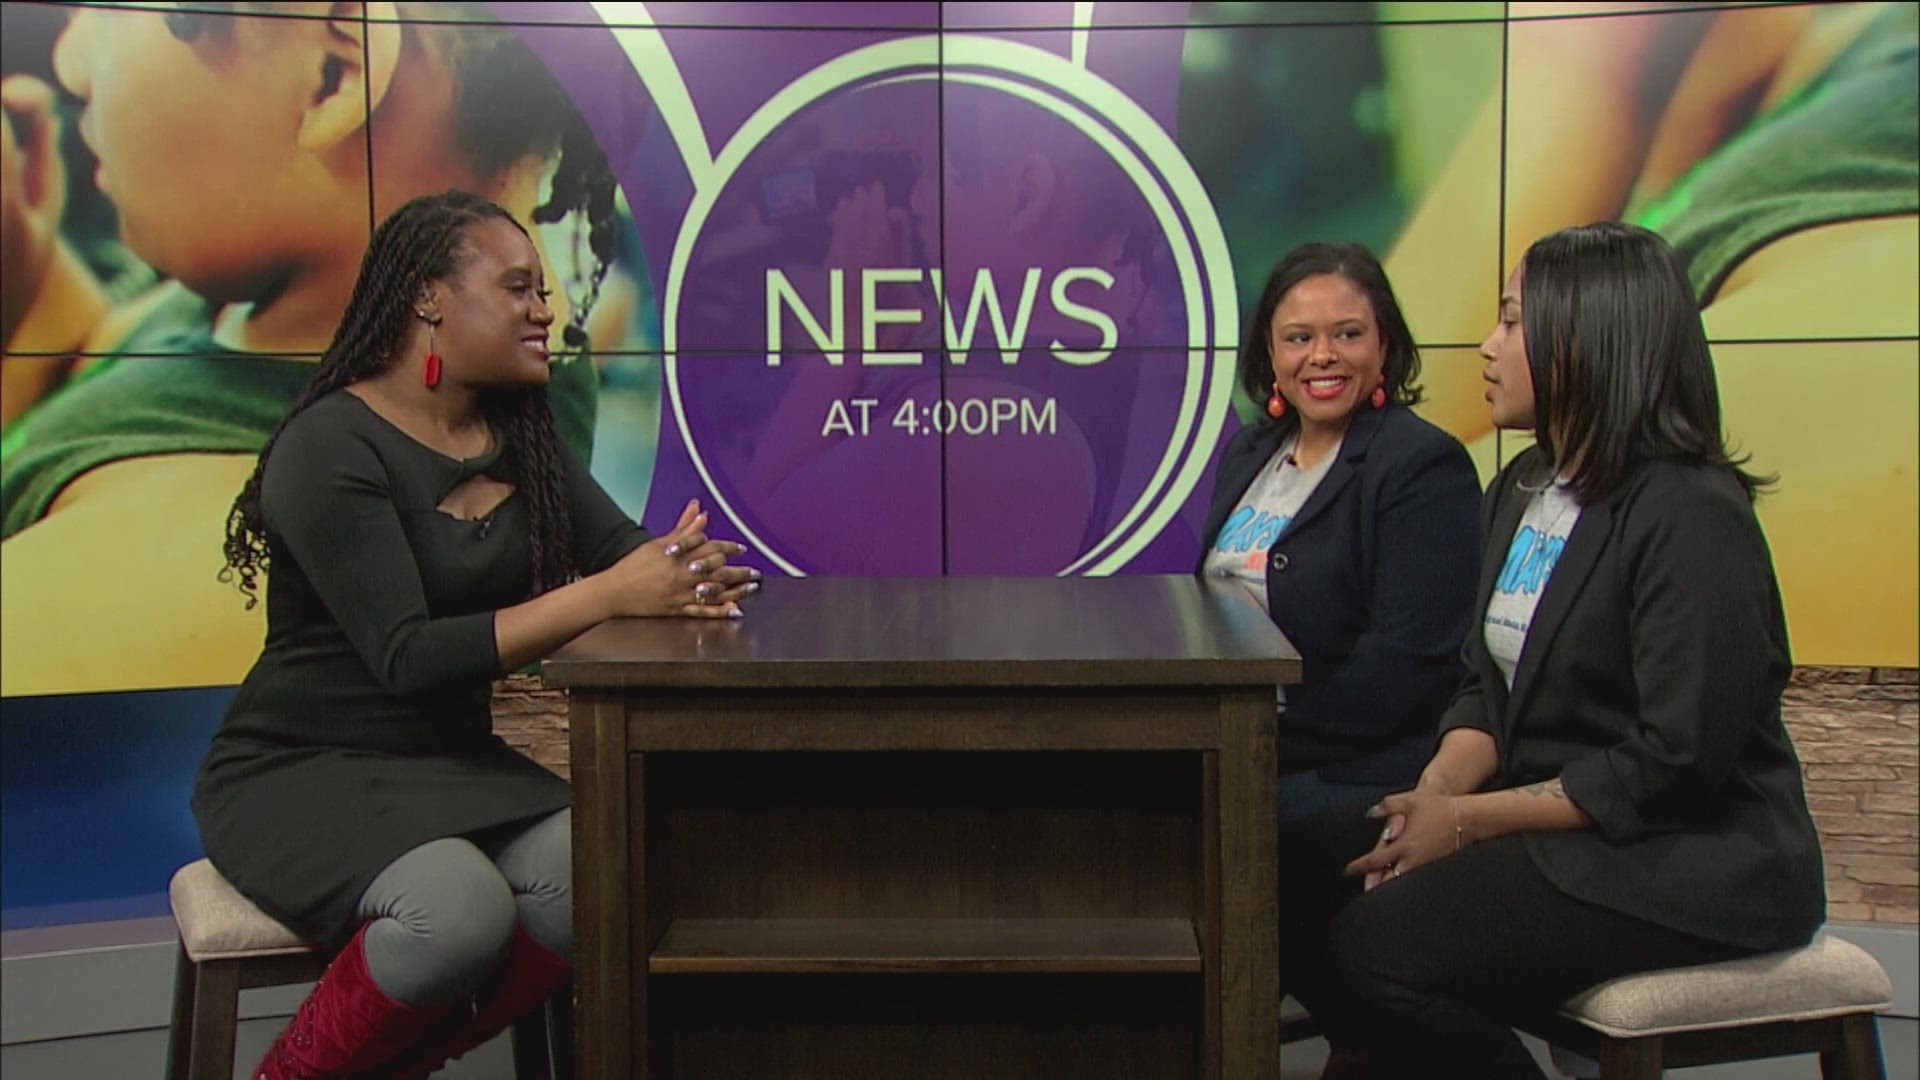 Tisha Mays and Crystal Smith from "aMAYSing Kids" talk with Tatiana Cash about how the local organization is helping kids.